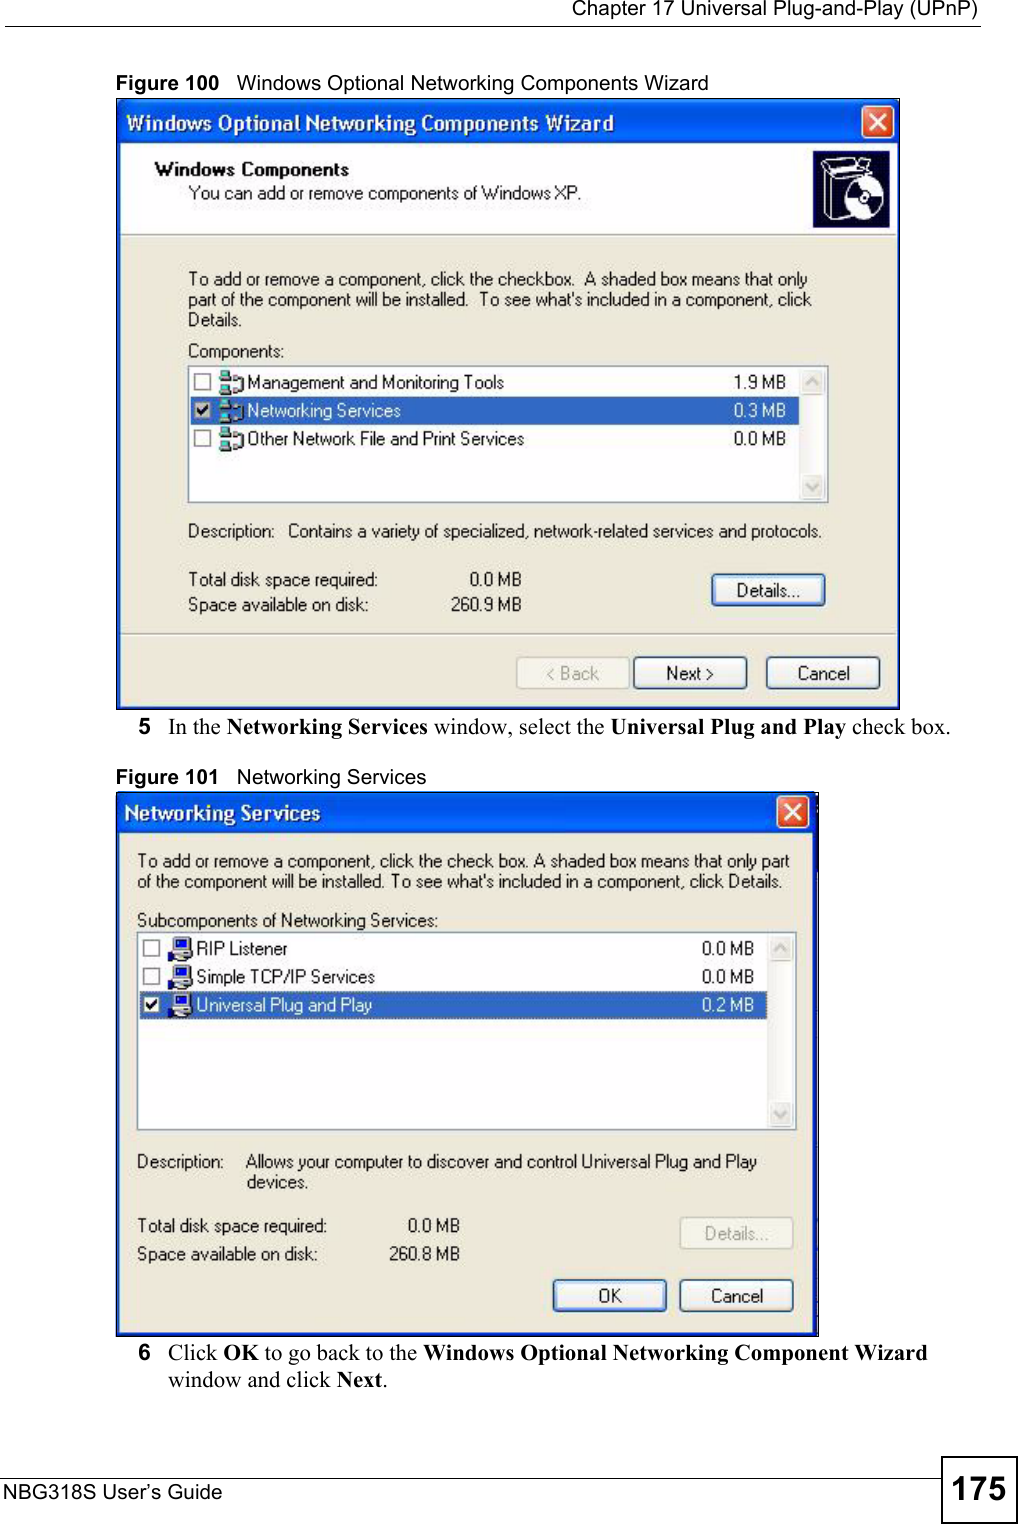  Chapter 17 Universal Plug-and-Play (UPnP)NBG318S User’s Guide 175Figure 100   Windows Optional Networking Components Wizard5In the Networking Services window, select the Universal Plug and Play check box. Figure 101   Networking Services6Click OK to go back to the Windows Optional Networking Component Wizard window and click Next. 